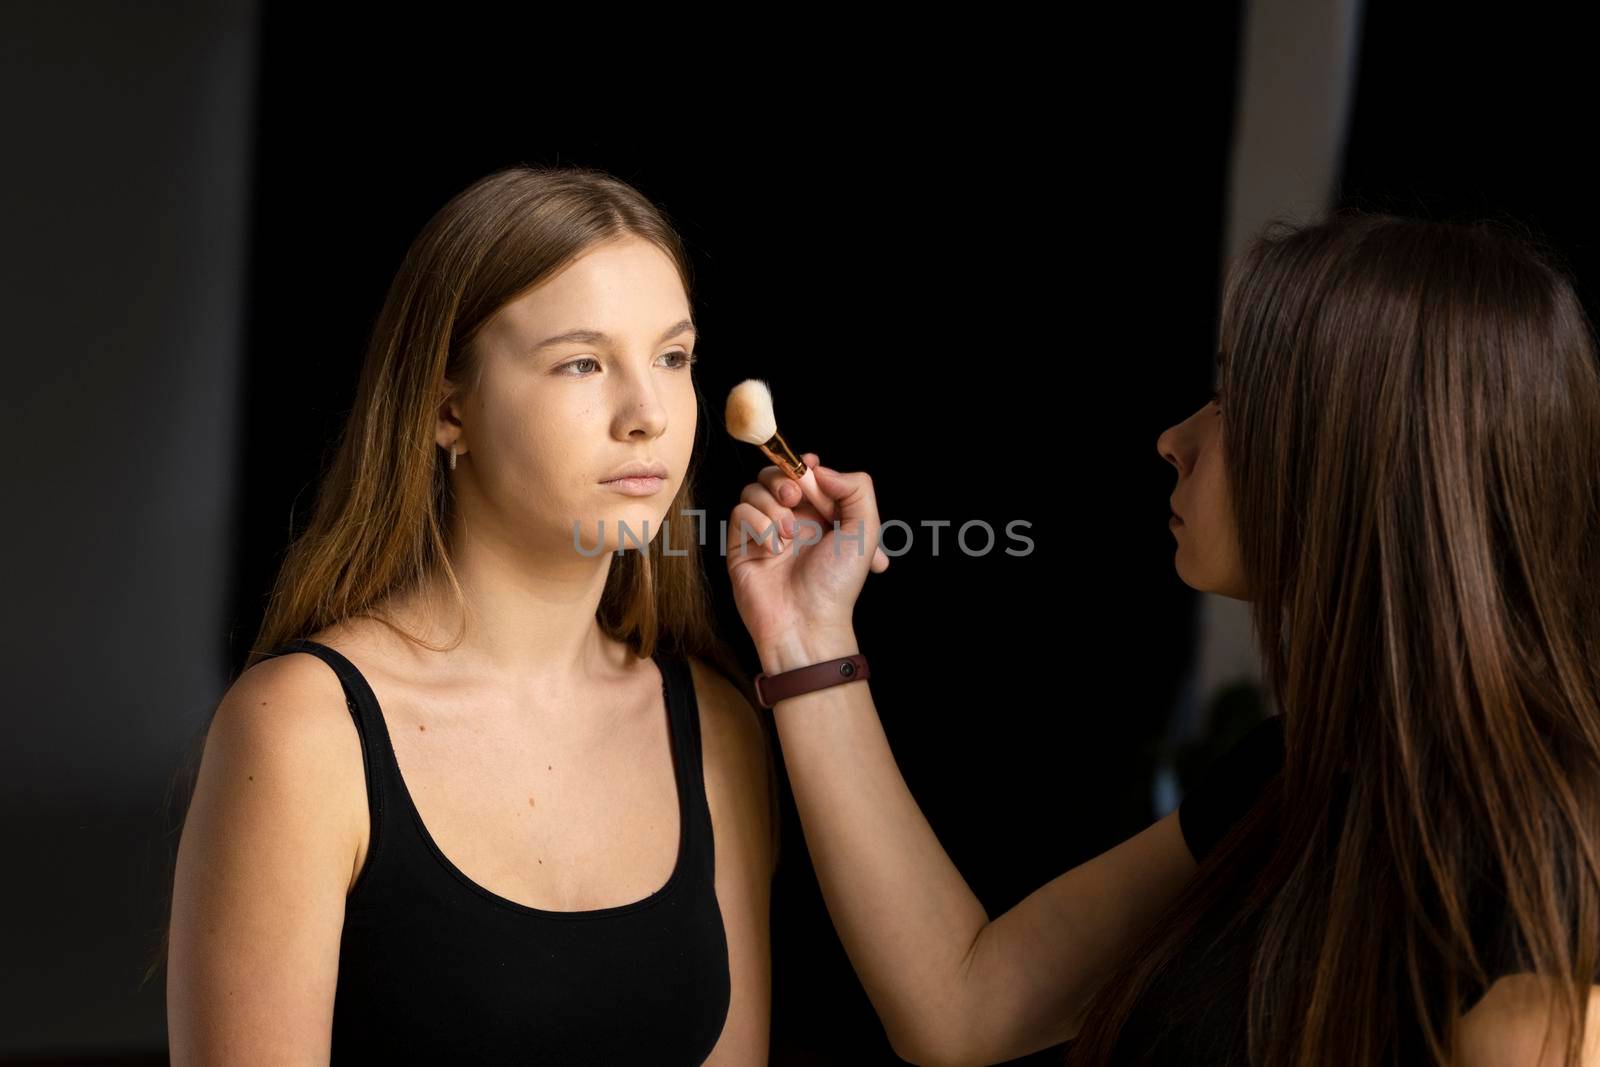 Professional make-up artist working with brush on model face. Process of making makeup. Portrait of young blonde woman in beauty salon interior. Applying tone to skin